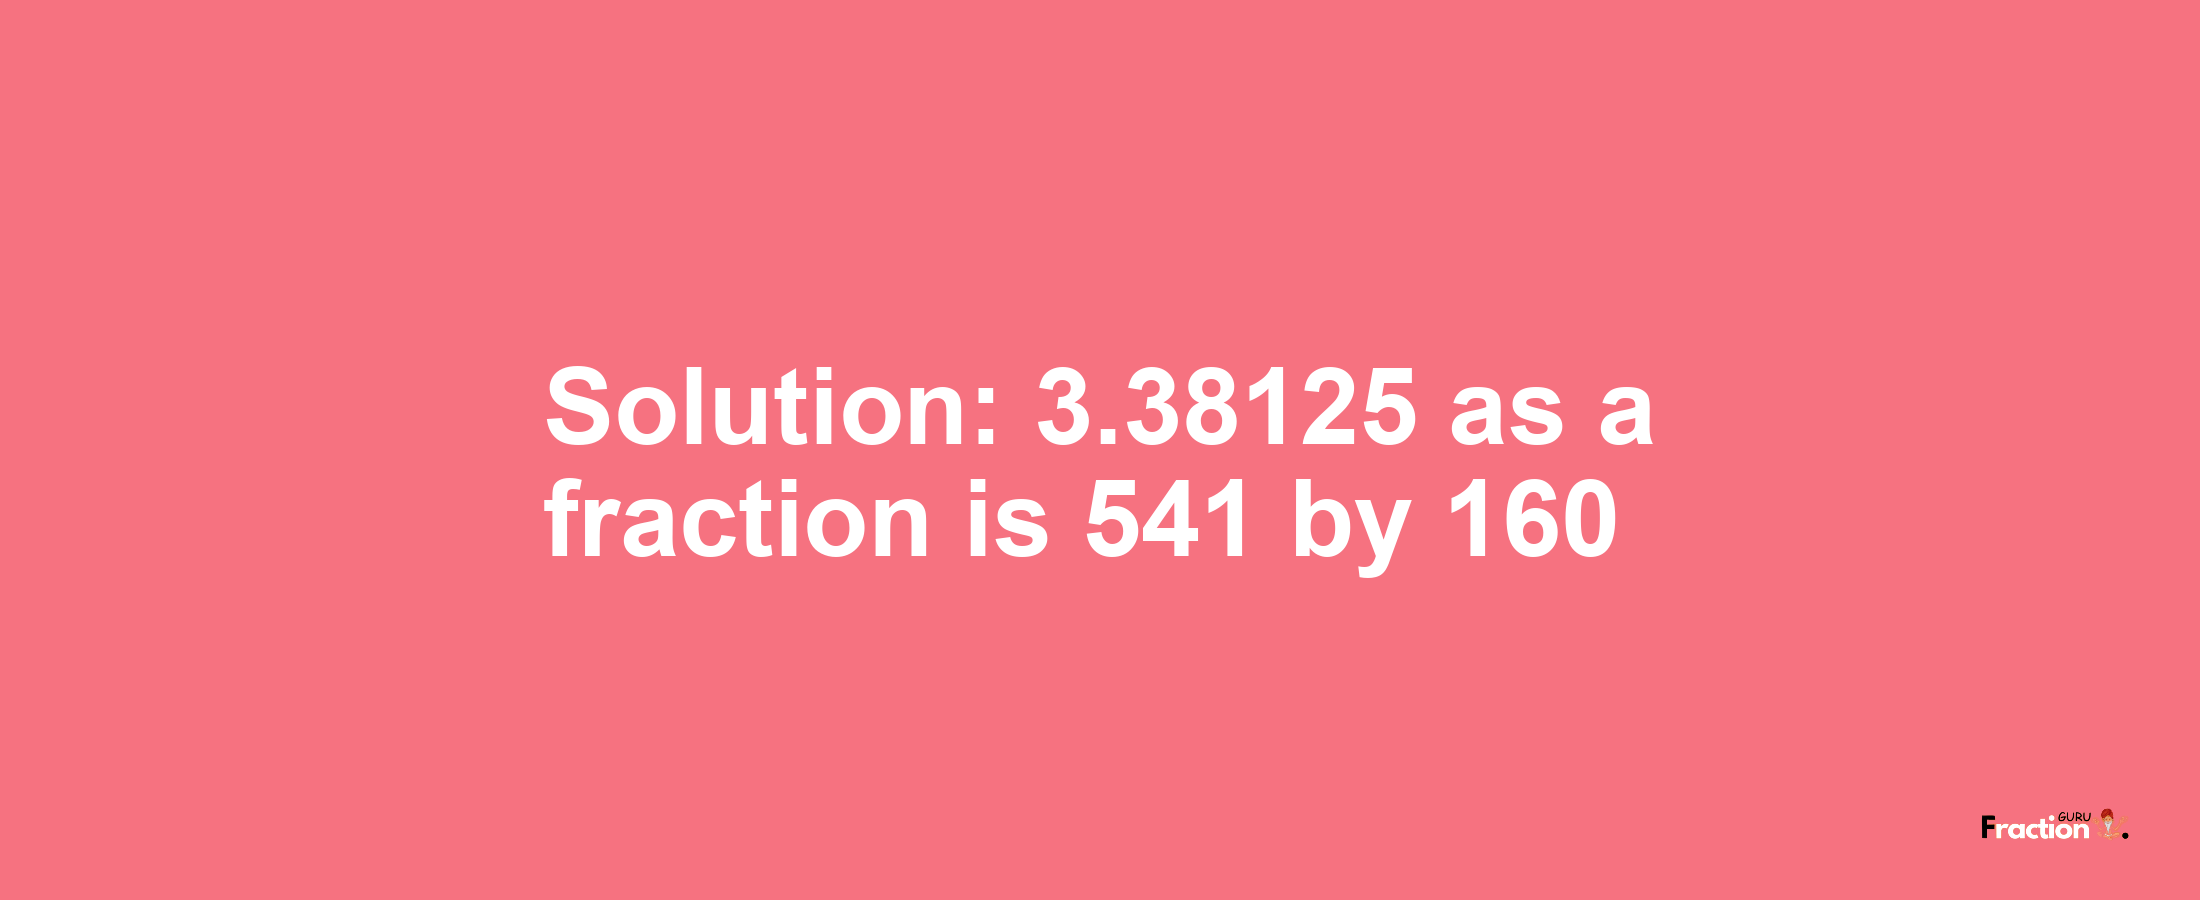 Solution:3.38125 as a fraction is 541/160